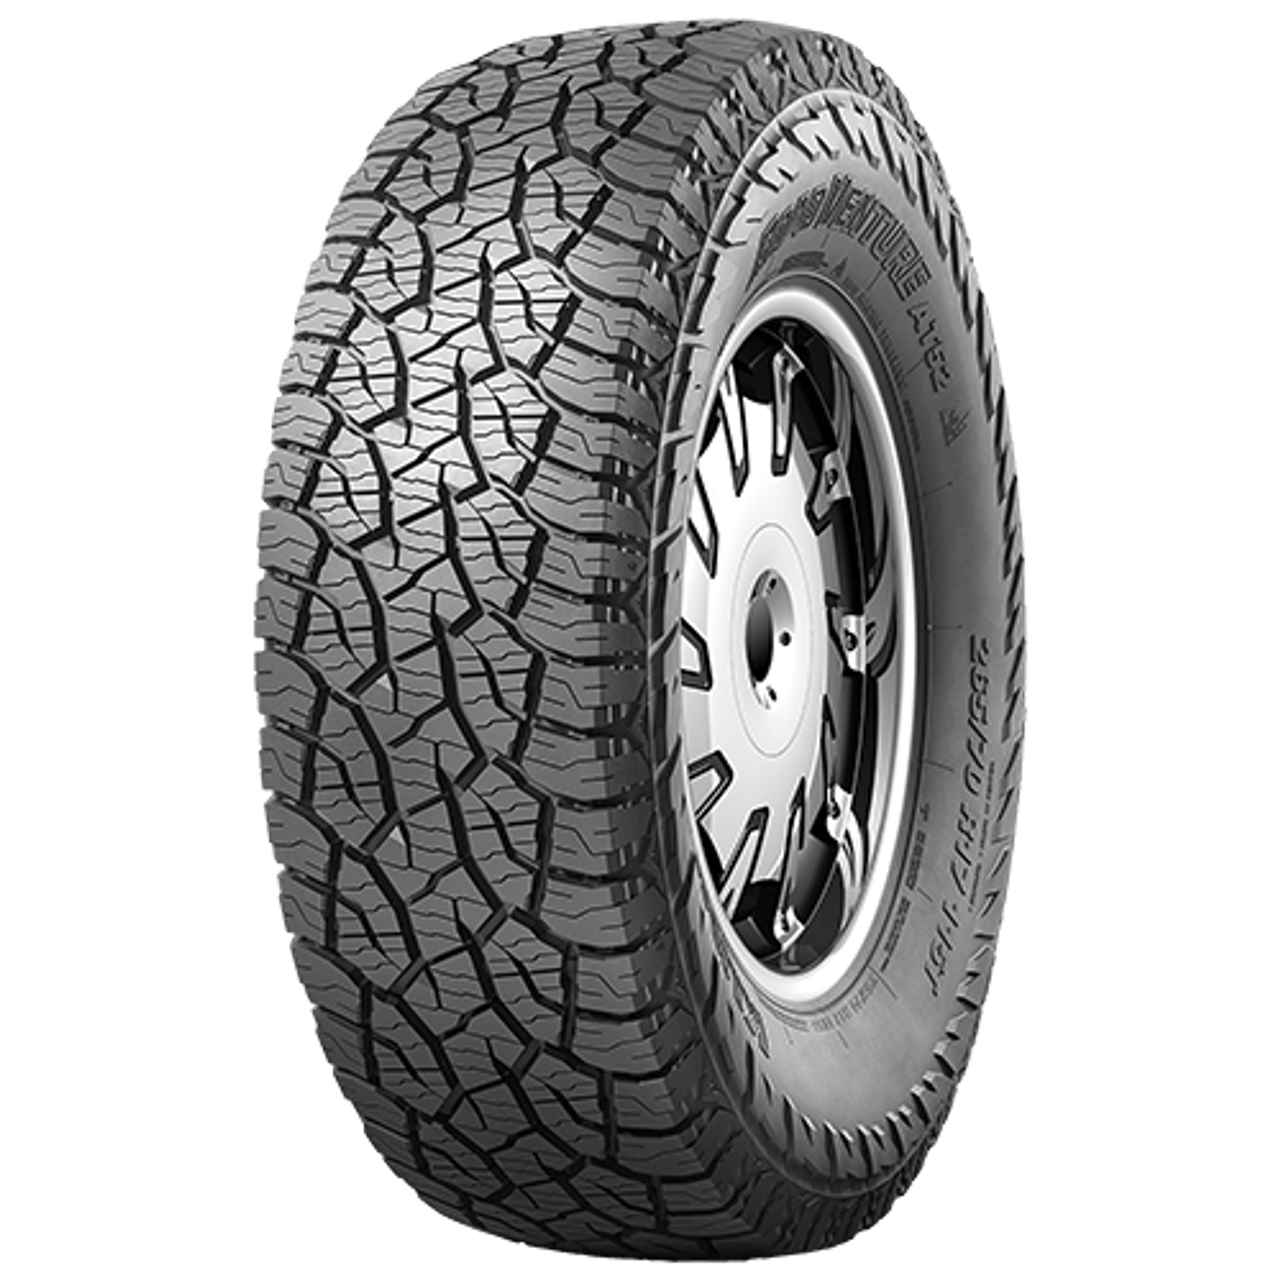 KUMHO ROAD VENTURE AT52 285/70R17 121R BSW